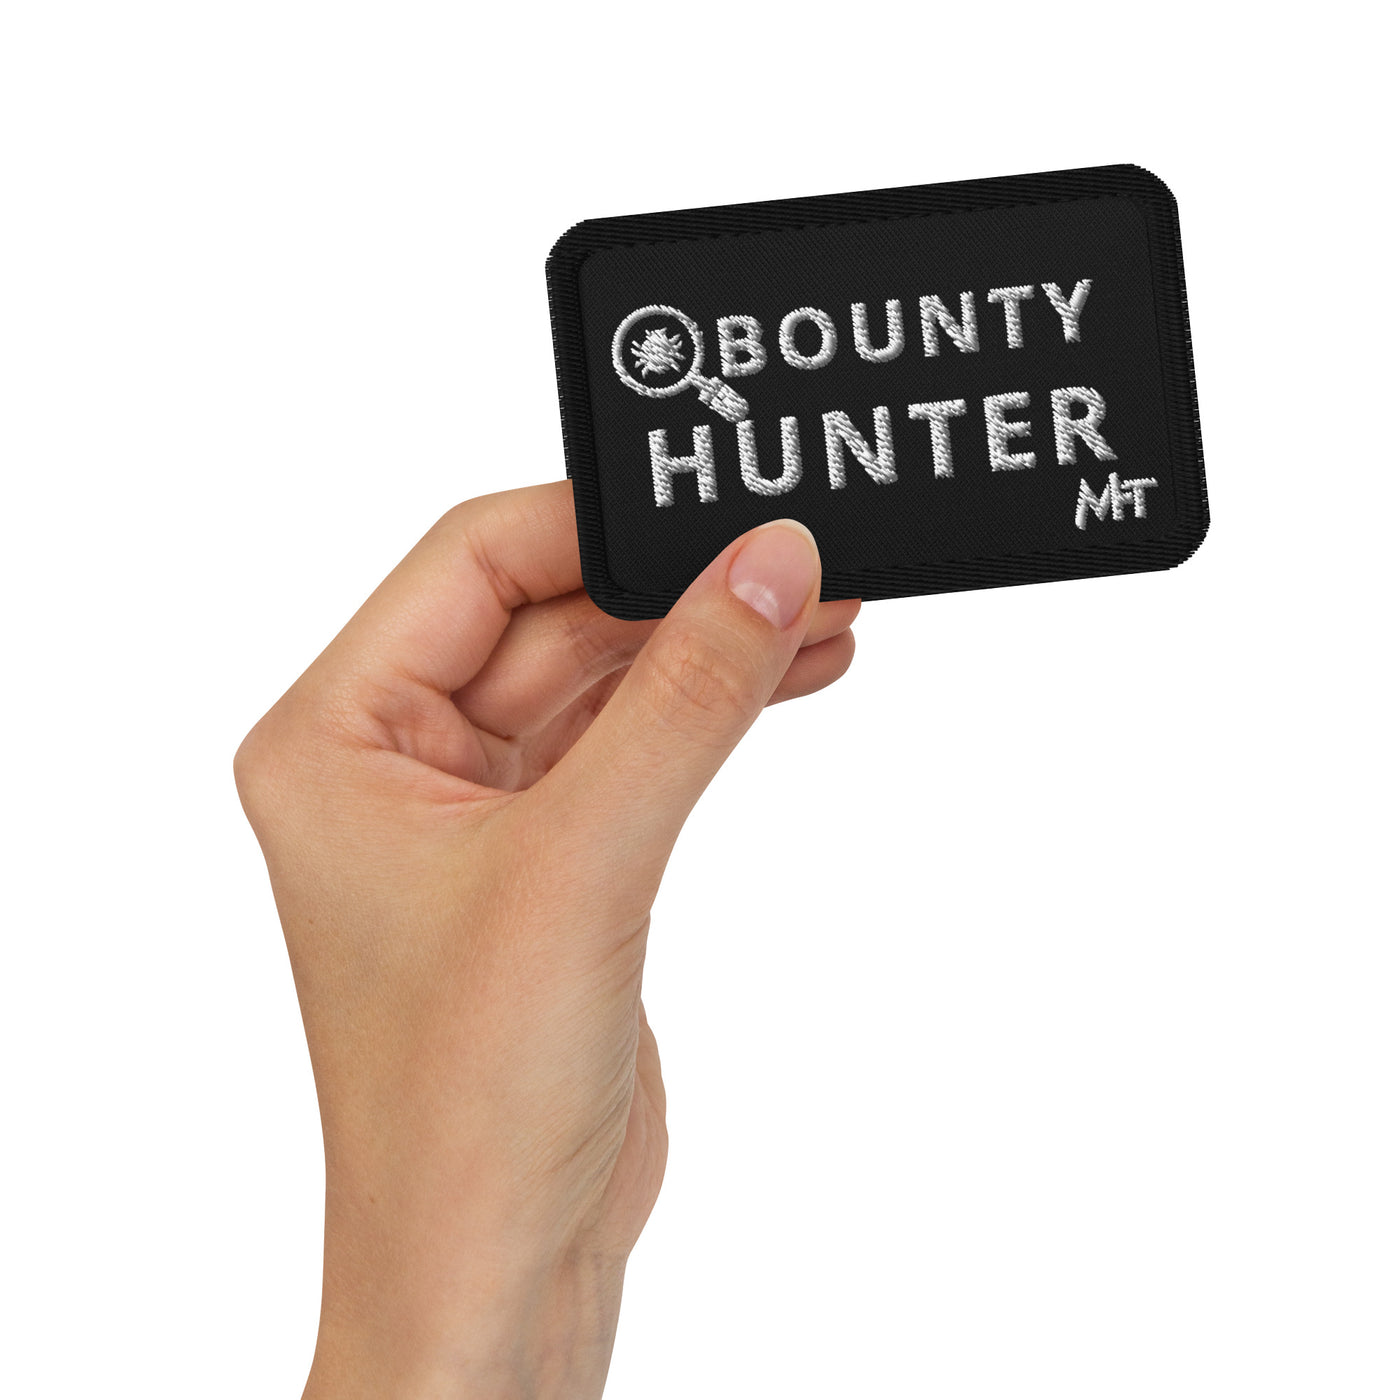 Bug Bounty Hunter - Embroidered patches